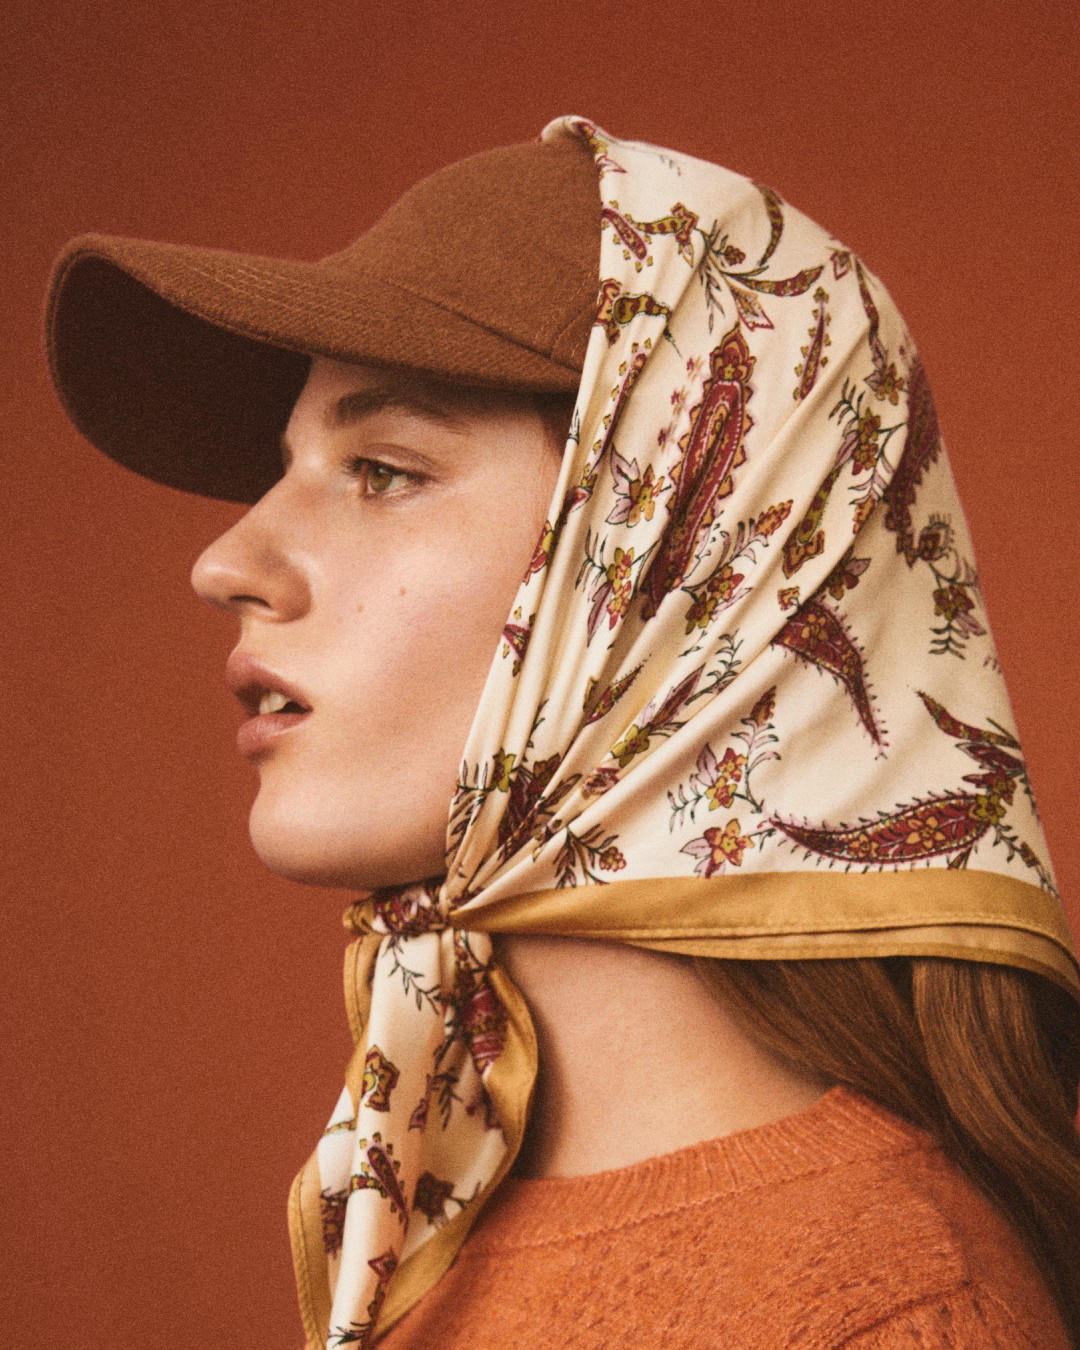 MANGO - In terms of versatility, we can agree that a scarf conquers all styles